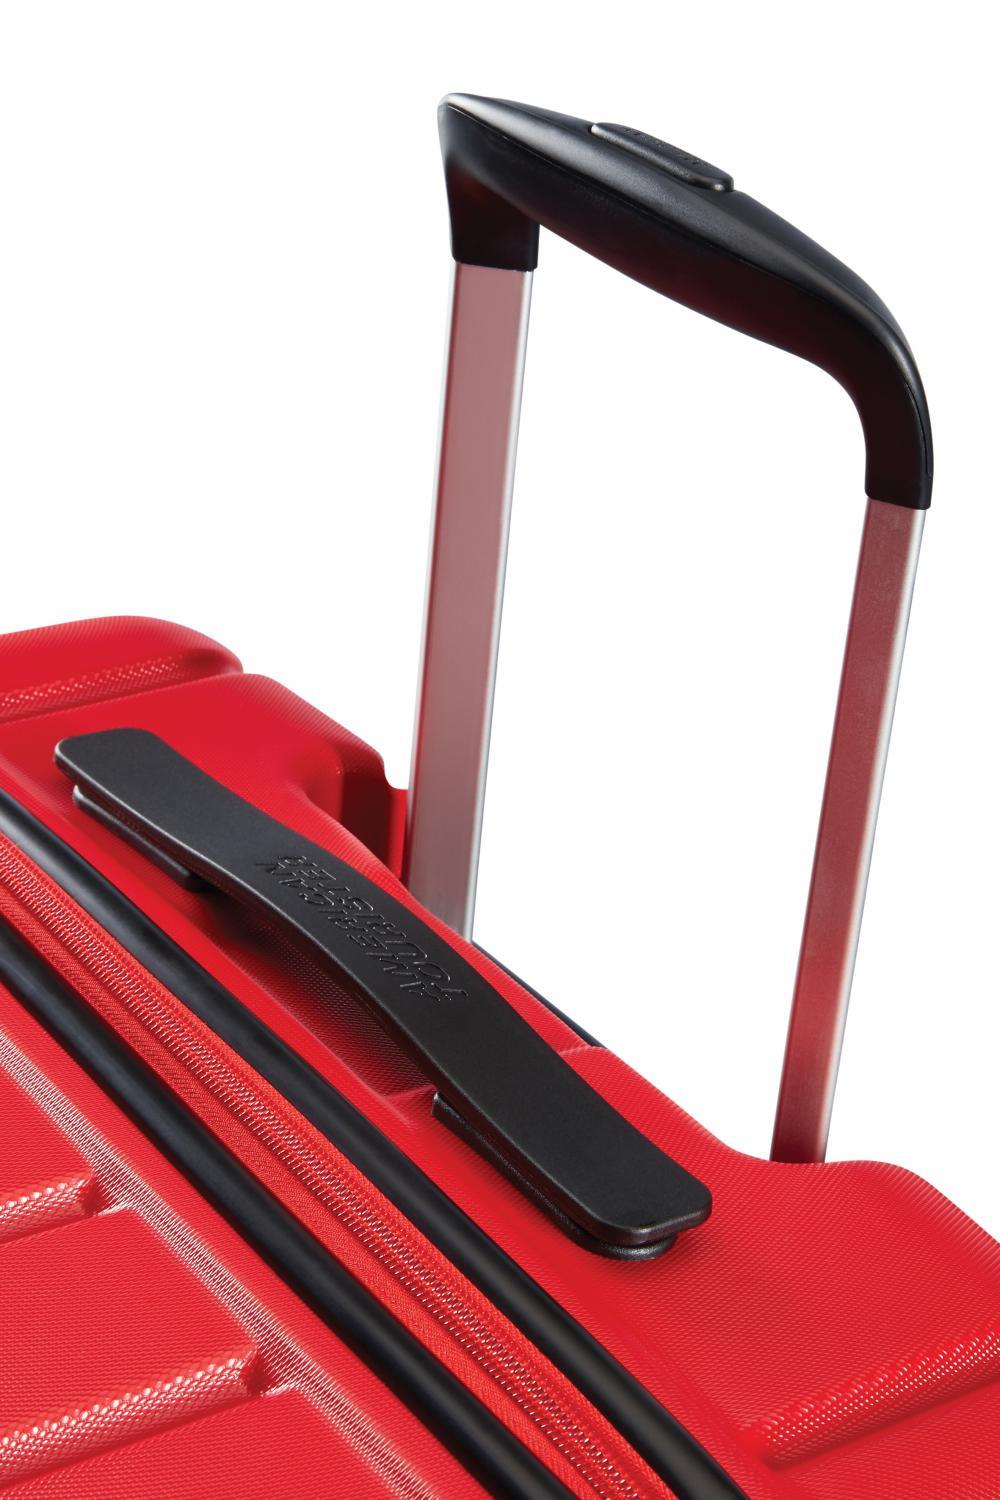 American Tourister 24'' Travel Suitcase RED P503354